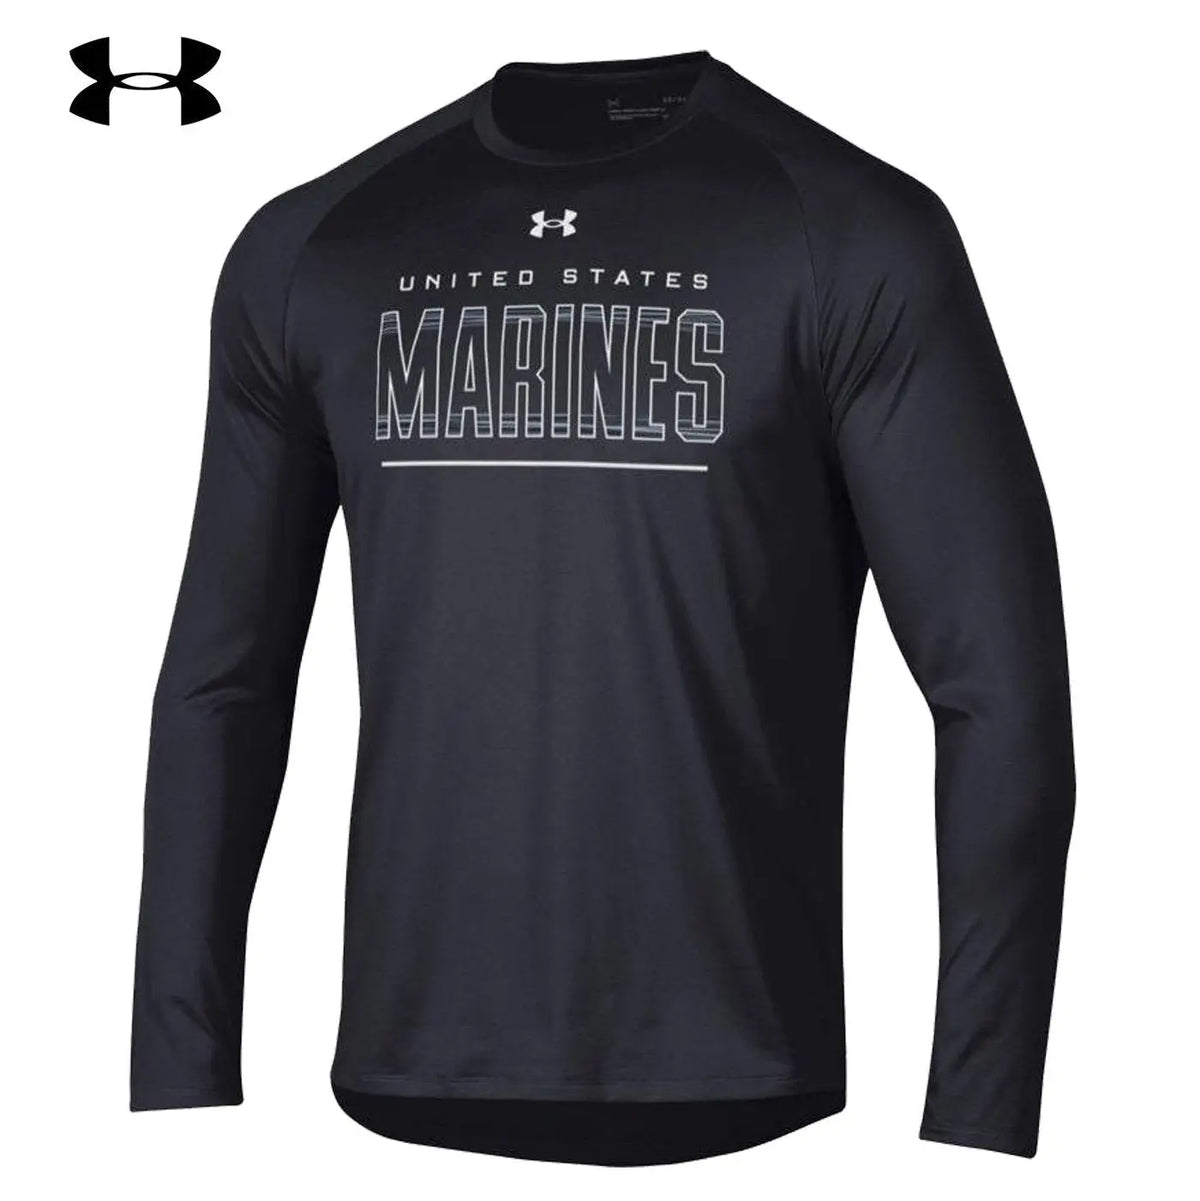 Embroidered Under Armour Men's White Performance Long-Sleeve